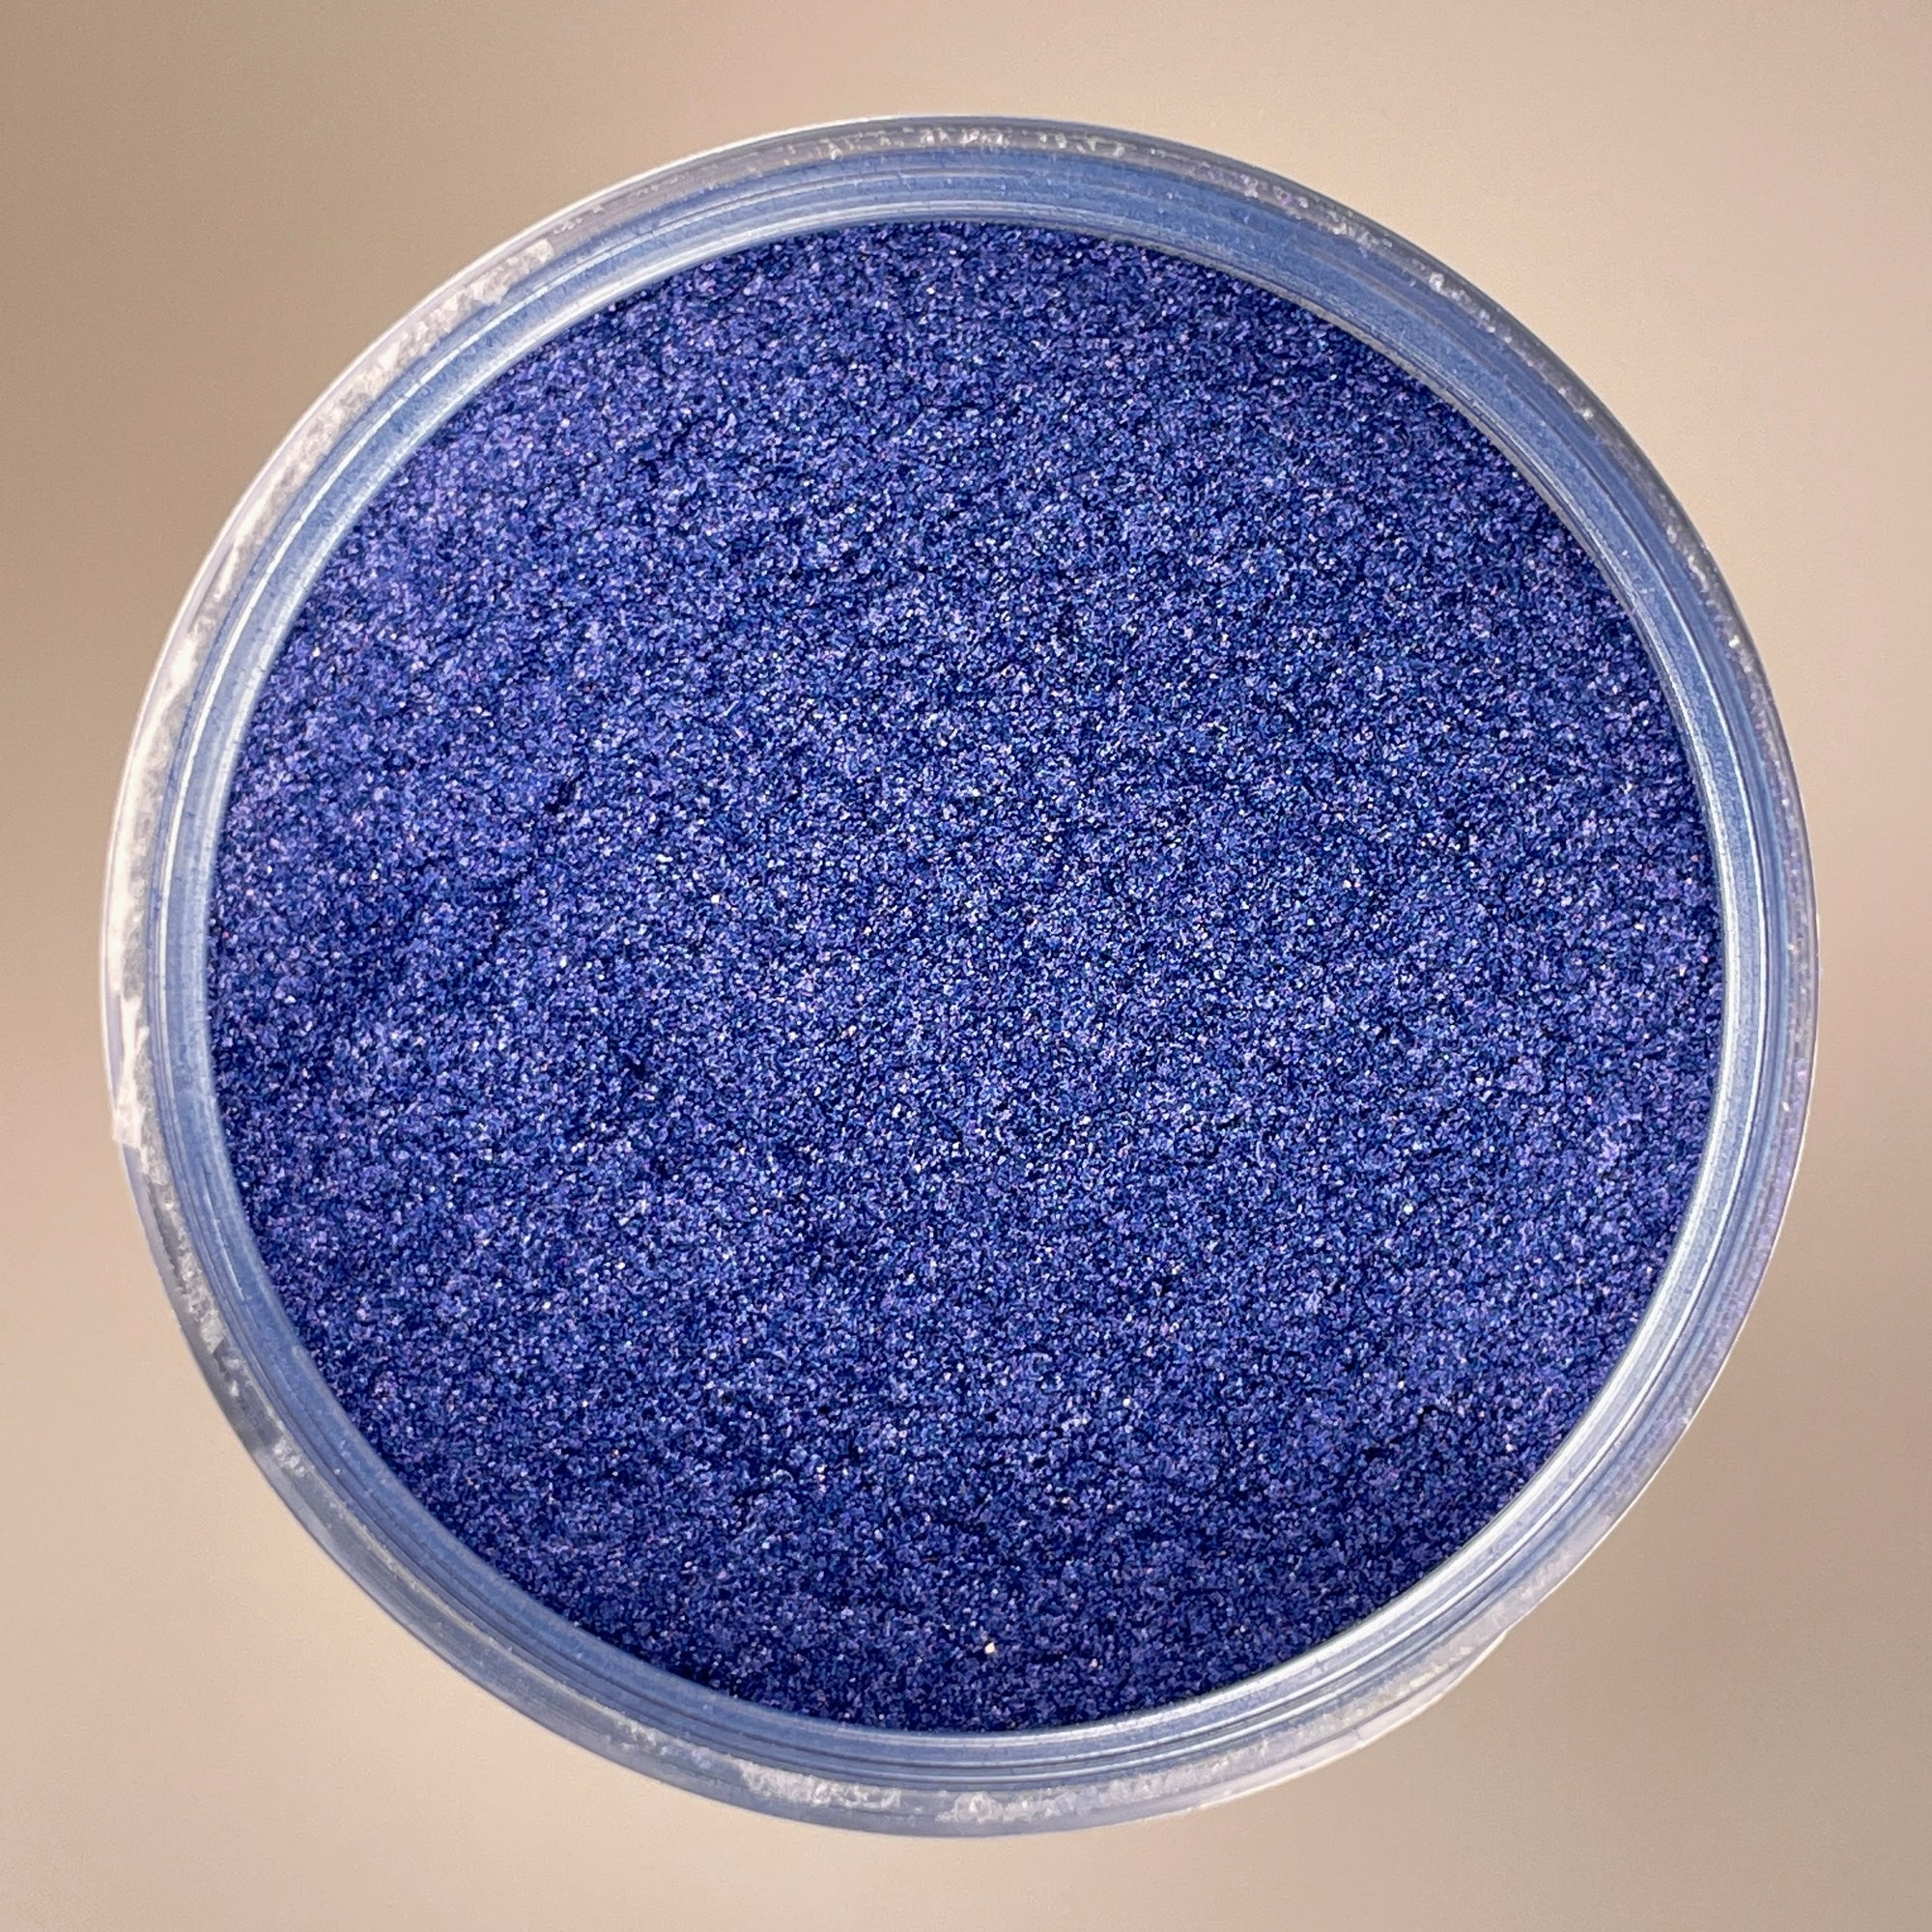 Finely milled mica powder for smooth and even application for various art pratices but also gives more of a glitter effect